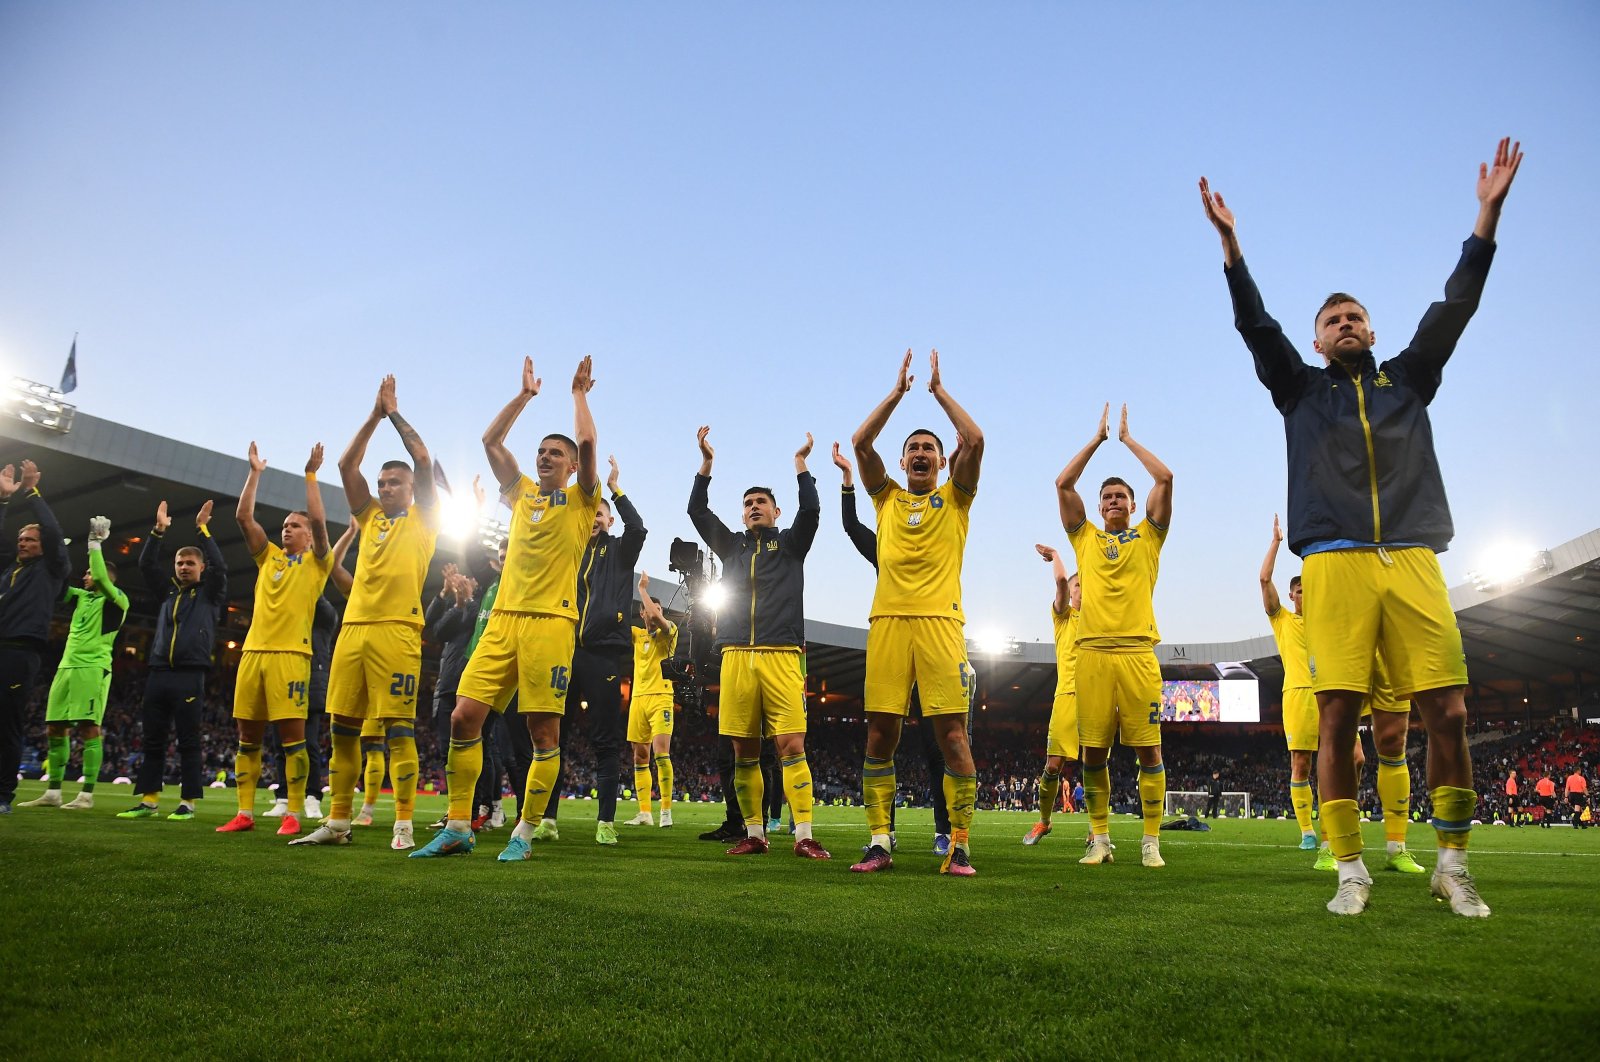 Ukraine&#039;s players applaud their fans after winning the FIFA World Cup 2022 playoff semifinal qualifier football match between Scotland and Ukraine at Hampden Park in Glasgow, Scotland on June 1, 2022. (AFP Photo)